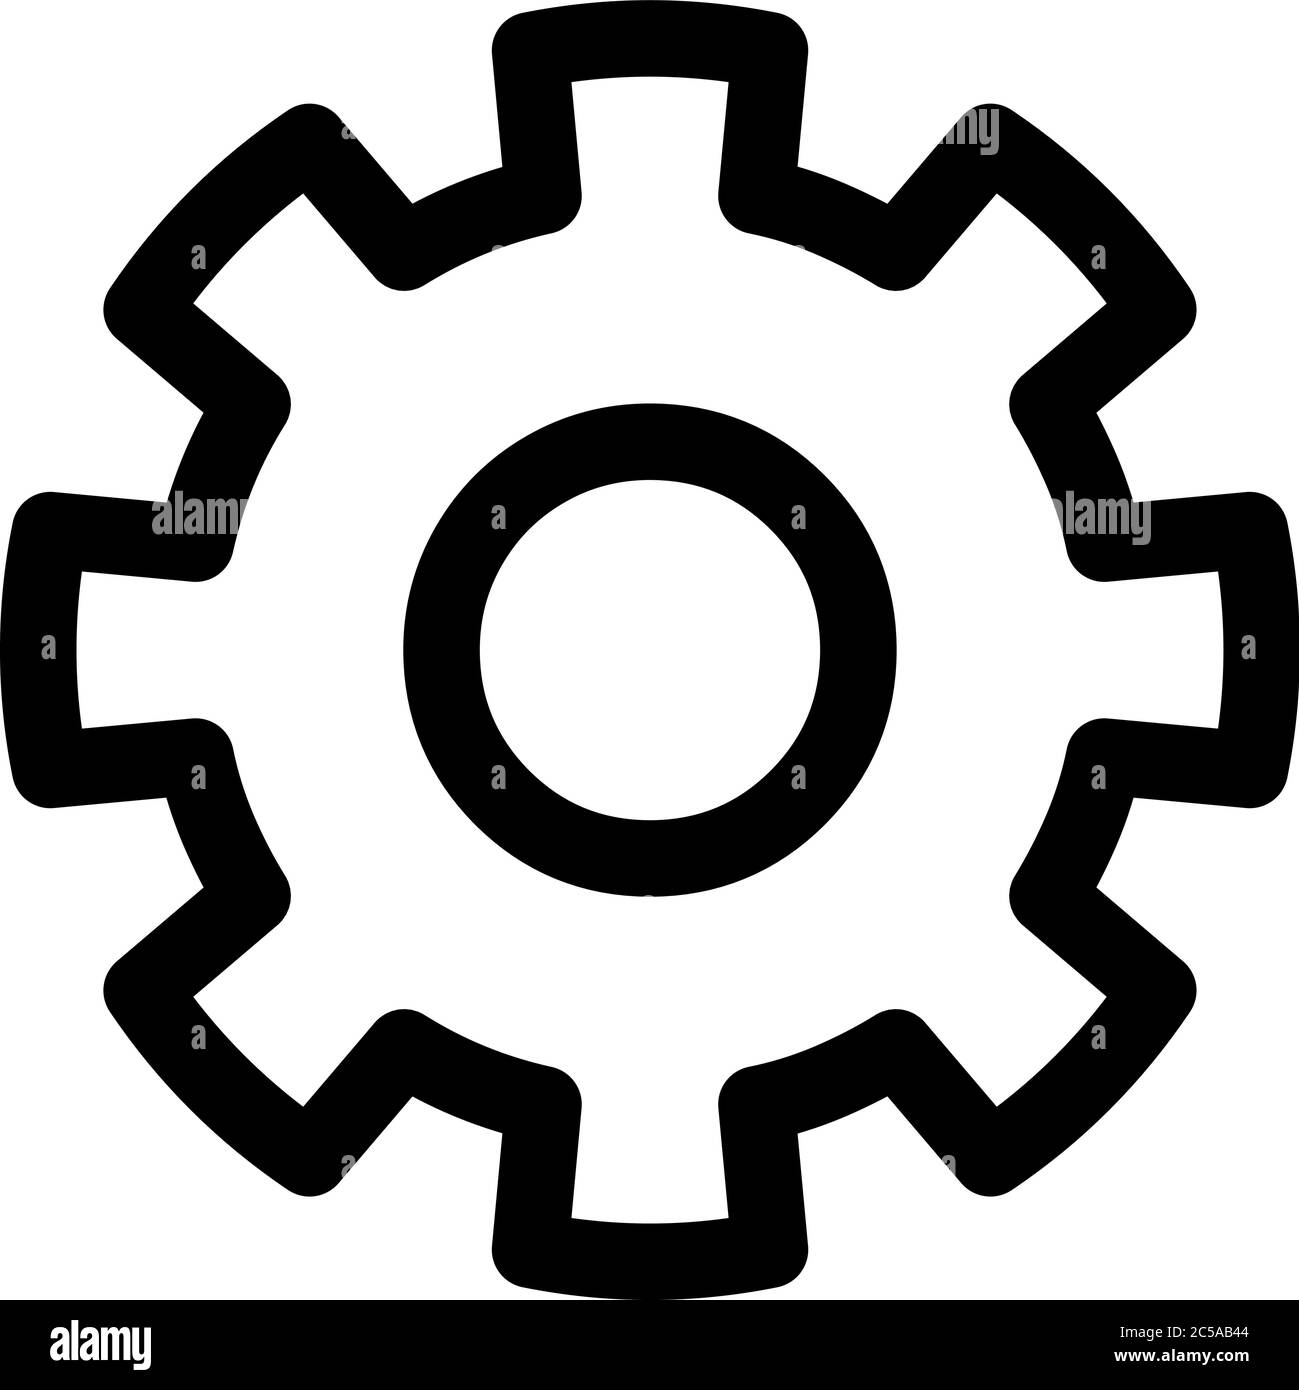 Cog wheel icon. Symbol of settings or gear. Outline modern design element. Simple black flat vector sign with rounded corners. Stock Vector